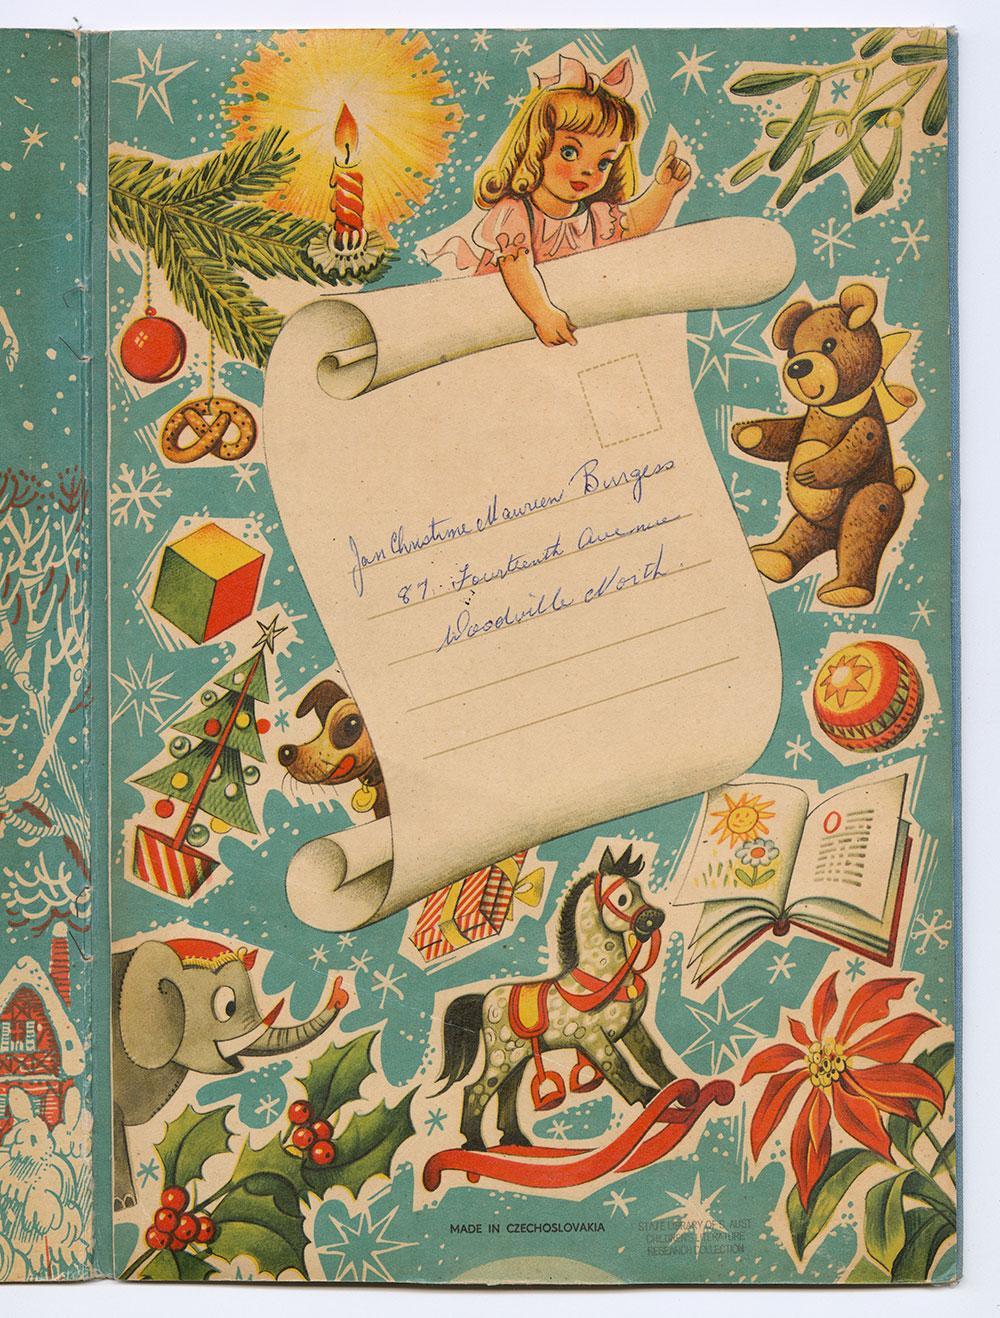 Detail of a page from Father Christmas, a book by Vojtěch Kubašta. SLSA: clrc i22817190